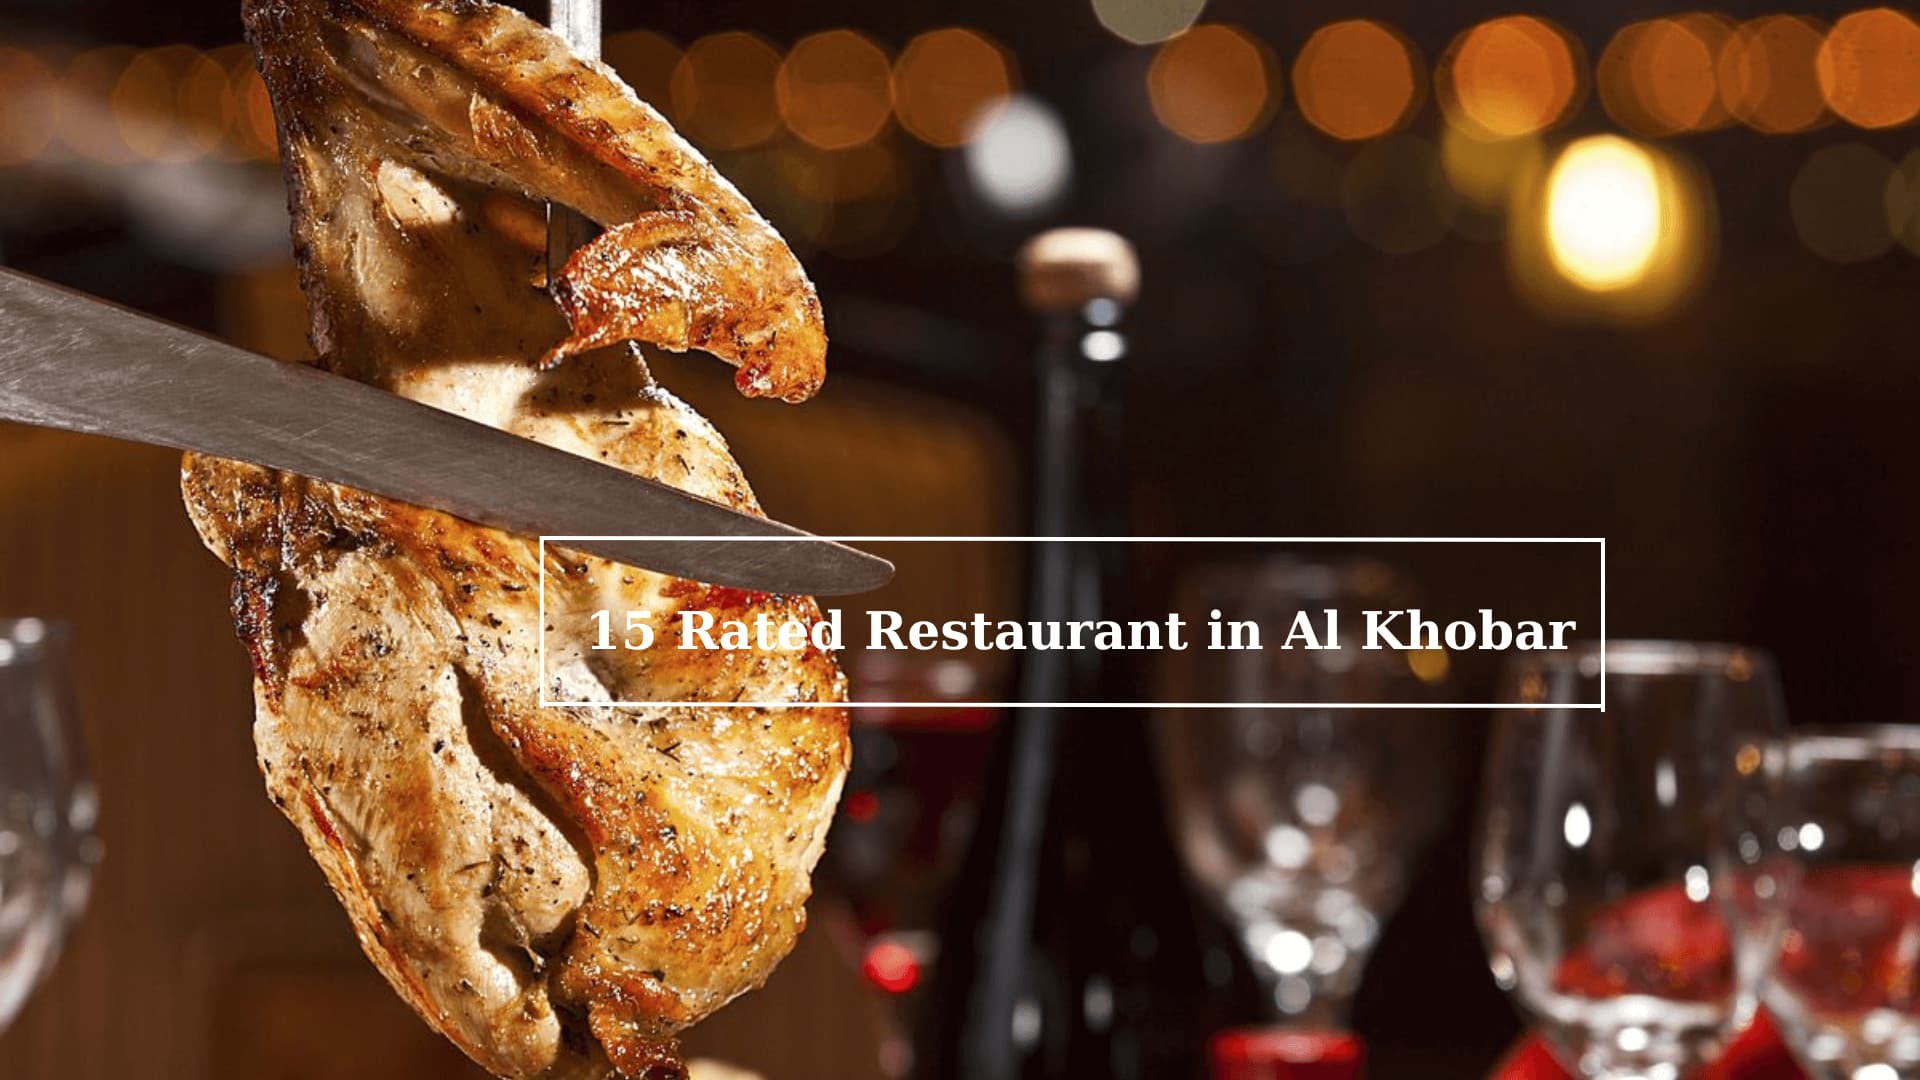 Top 15 Rated Restaurants in Al Khobar That You can’t miss